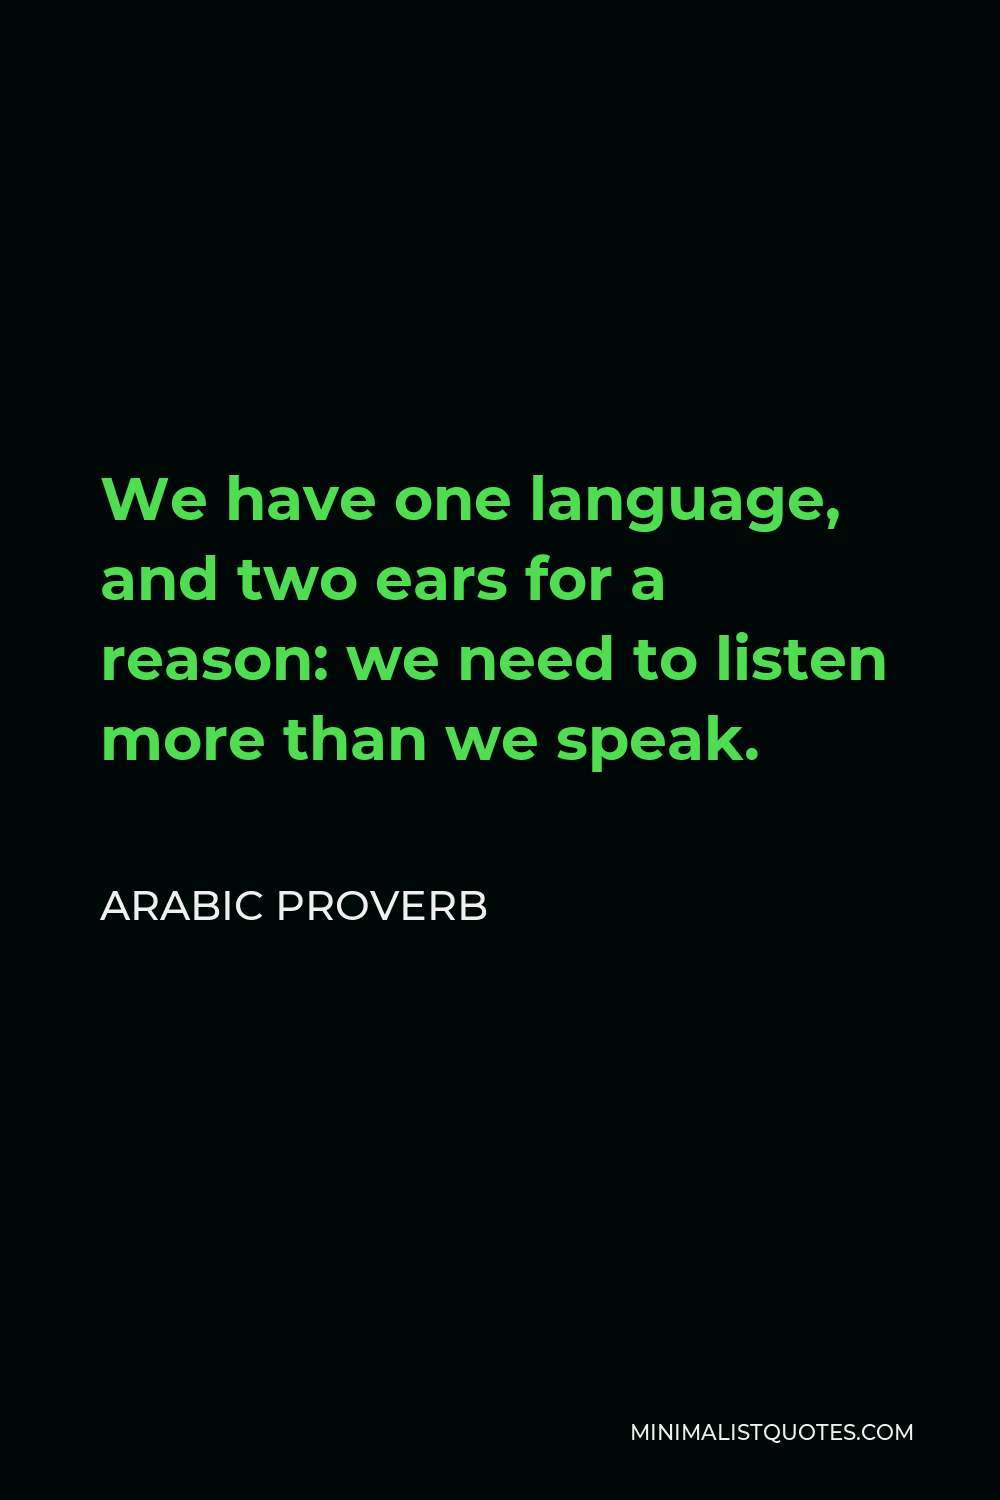 Arabic Proverb Quote - We have one language, and two ears for a reason: we need to listen more than we speak.